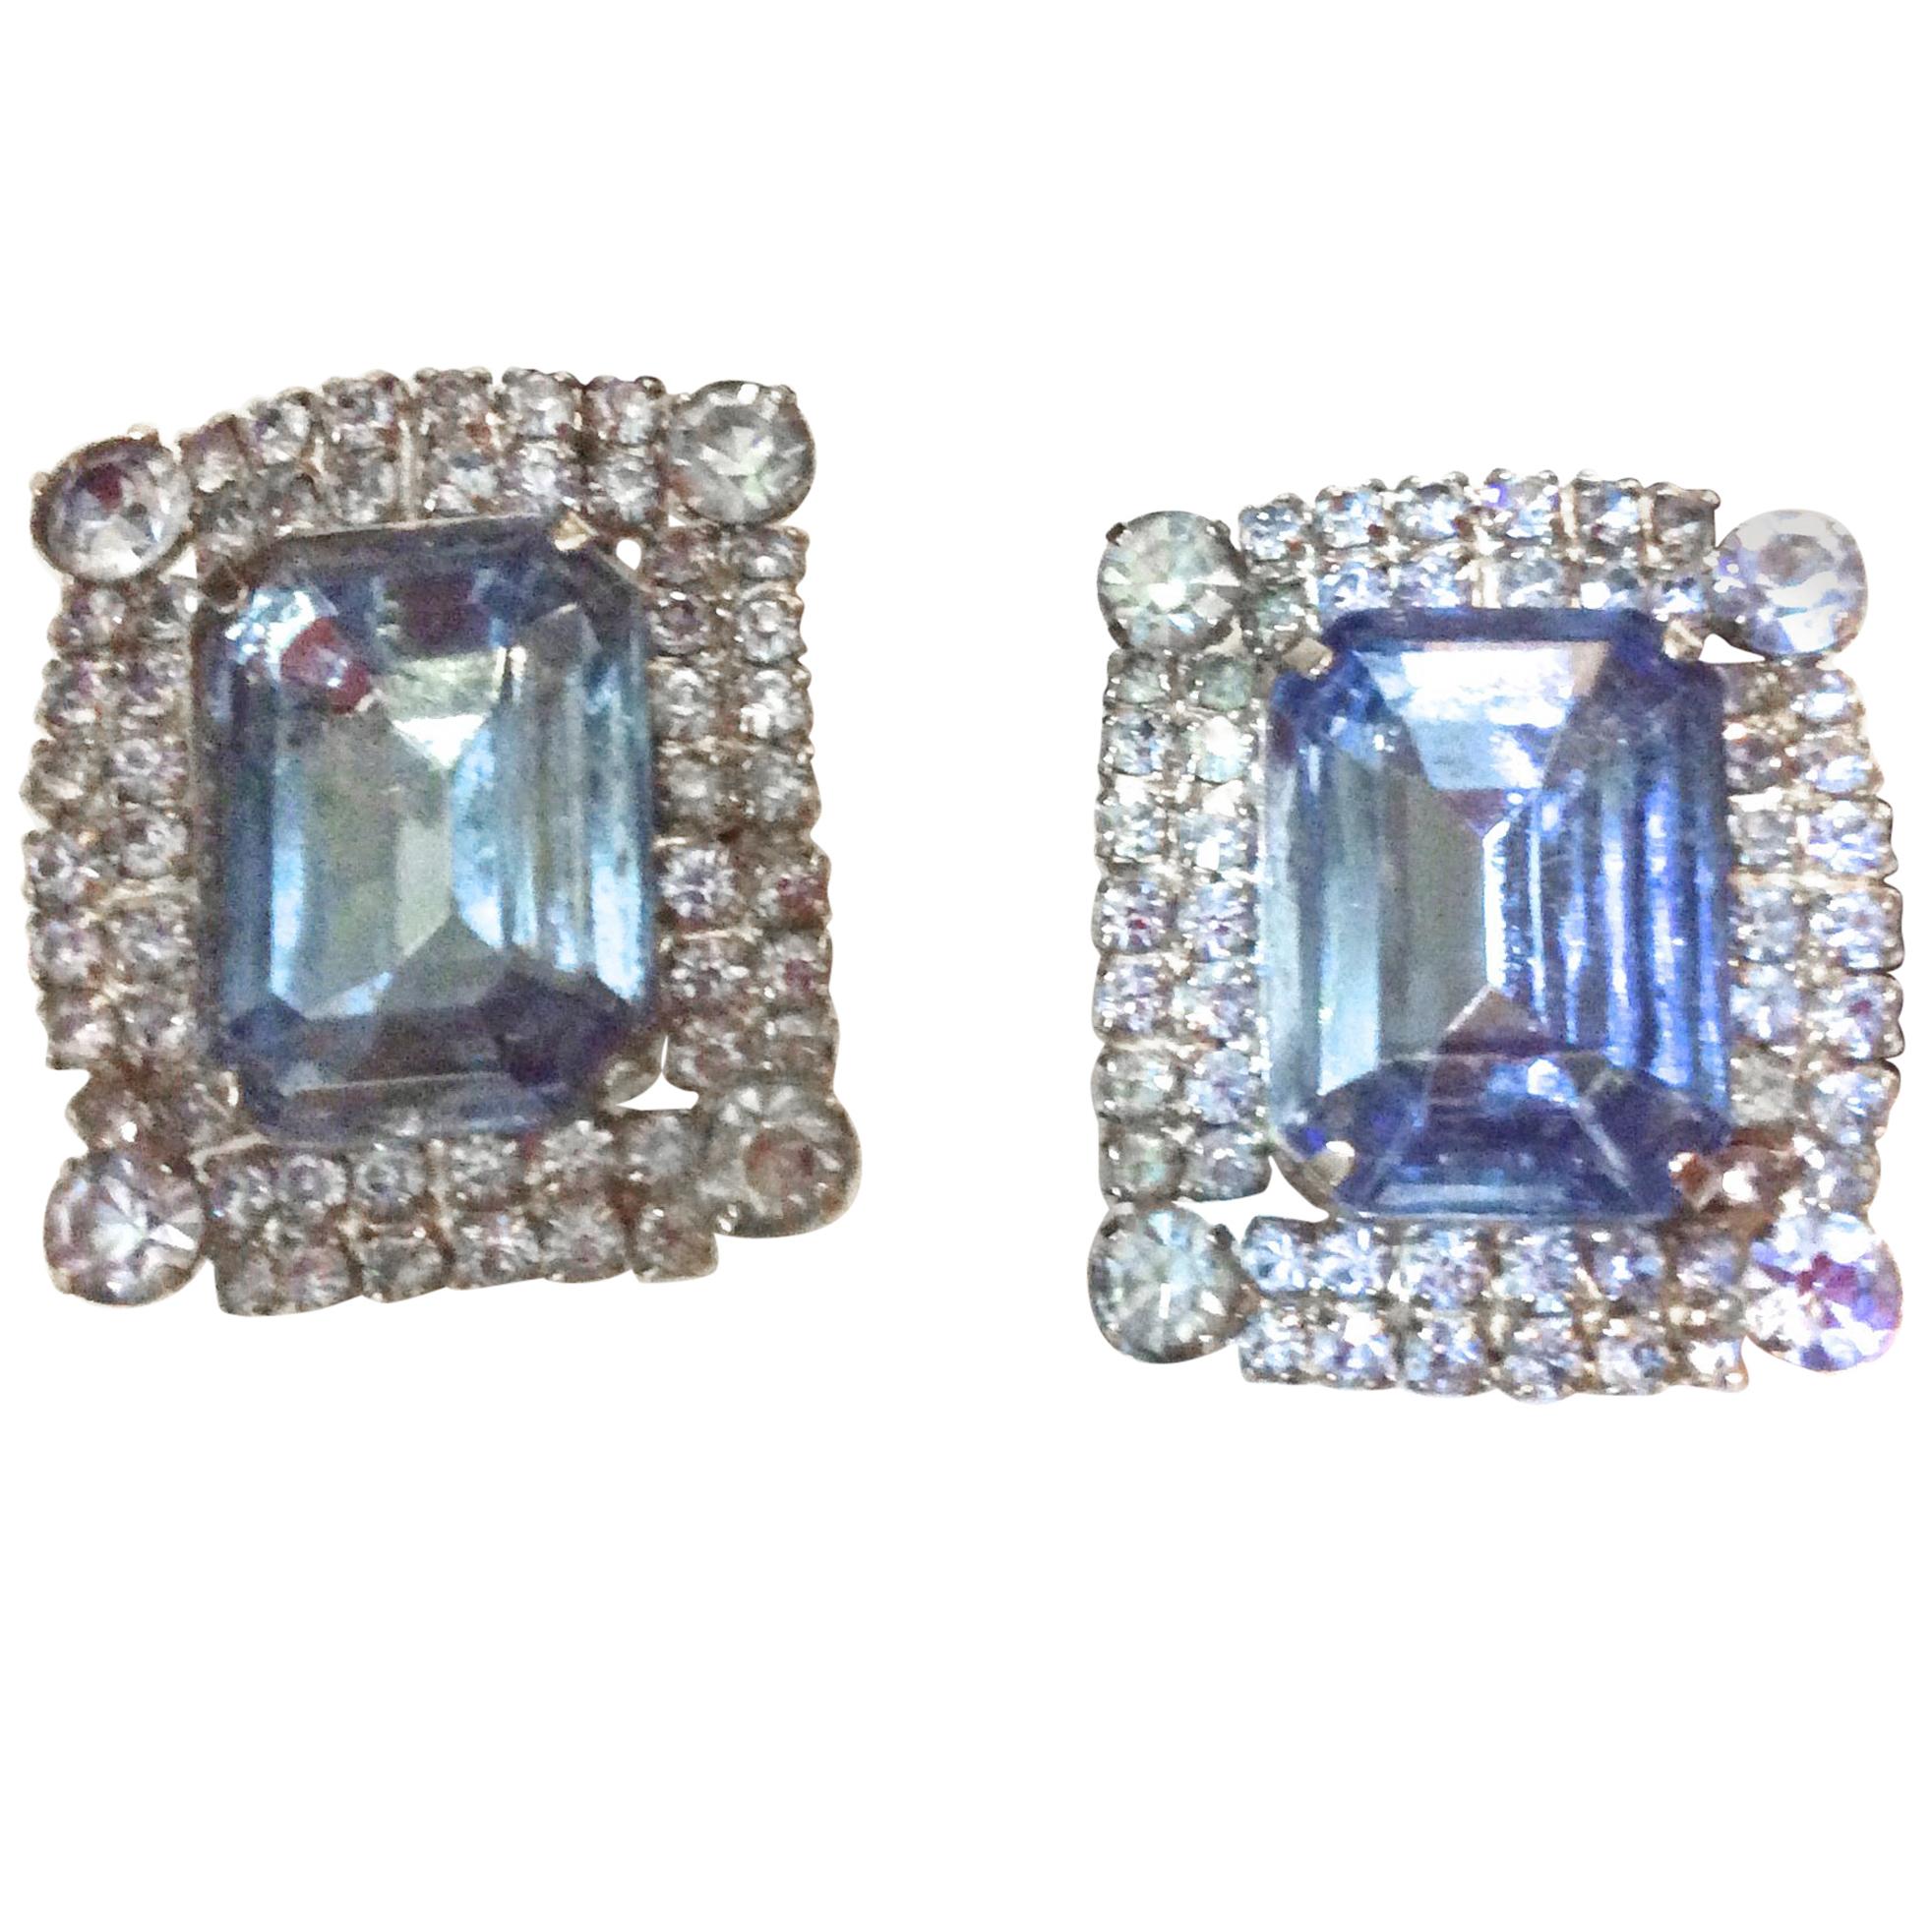 Magnificent Blue Rhinestone Clip Earrings - Early 1960's - Highly Unusual For Sale